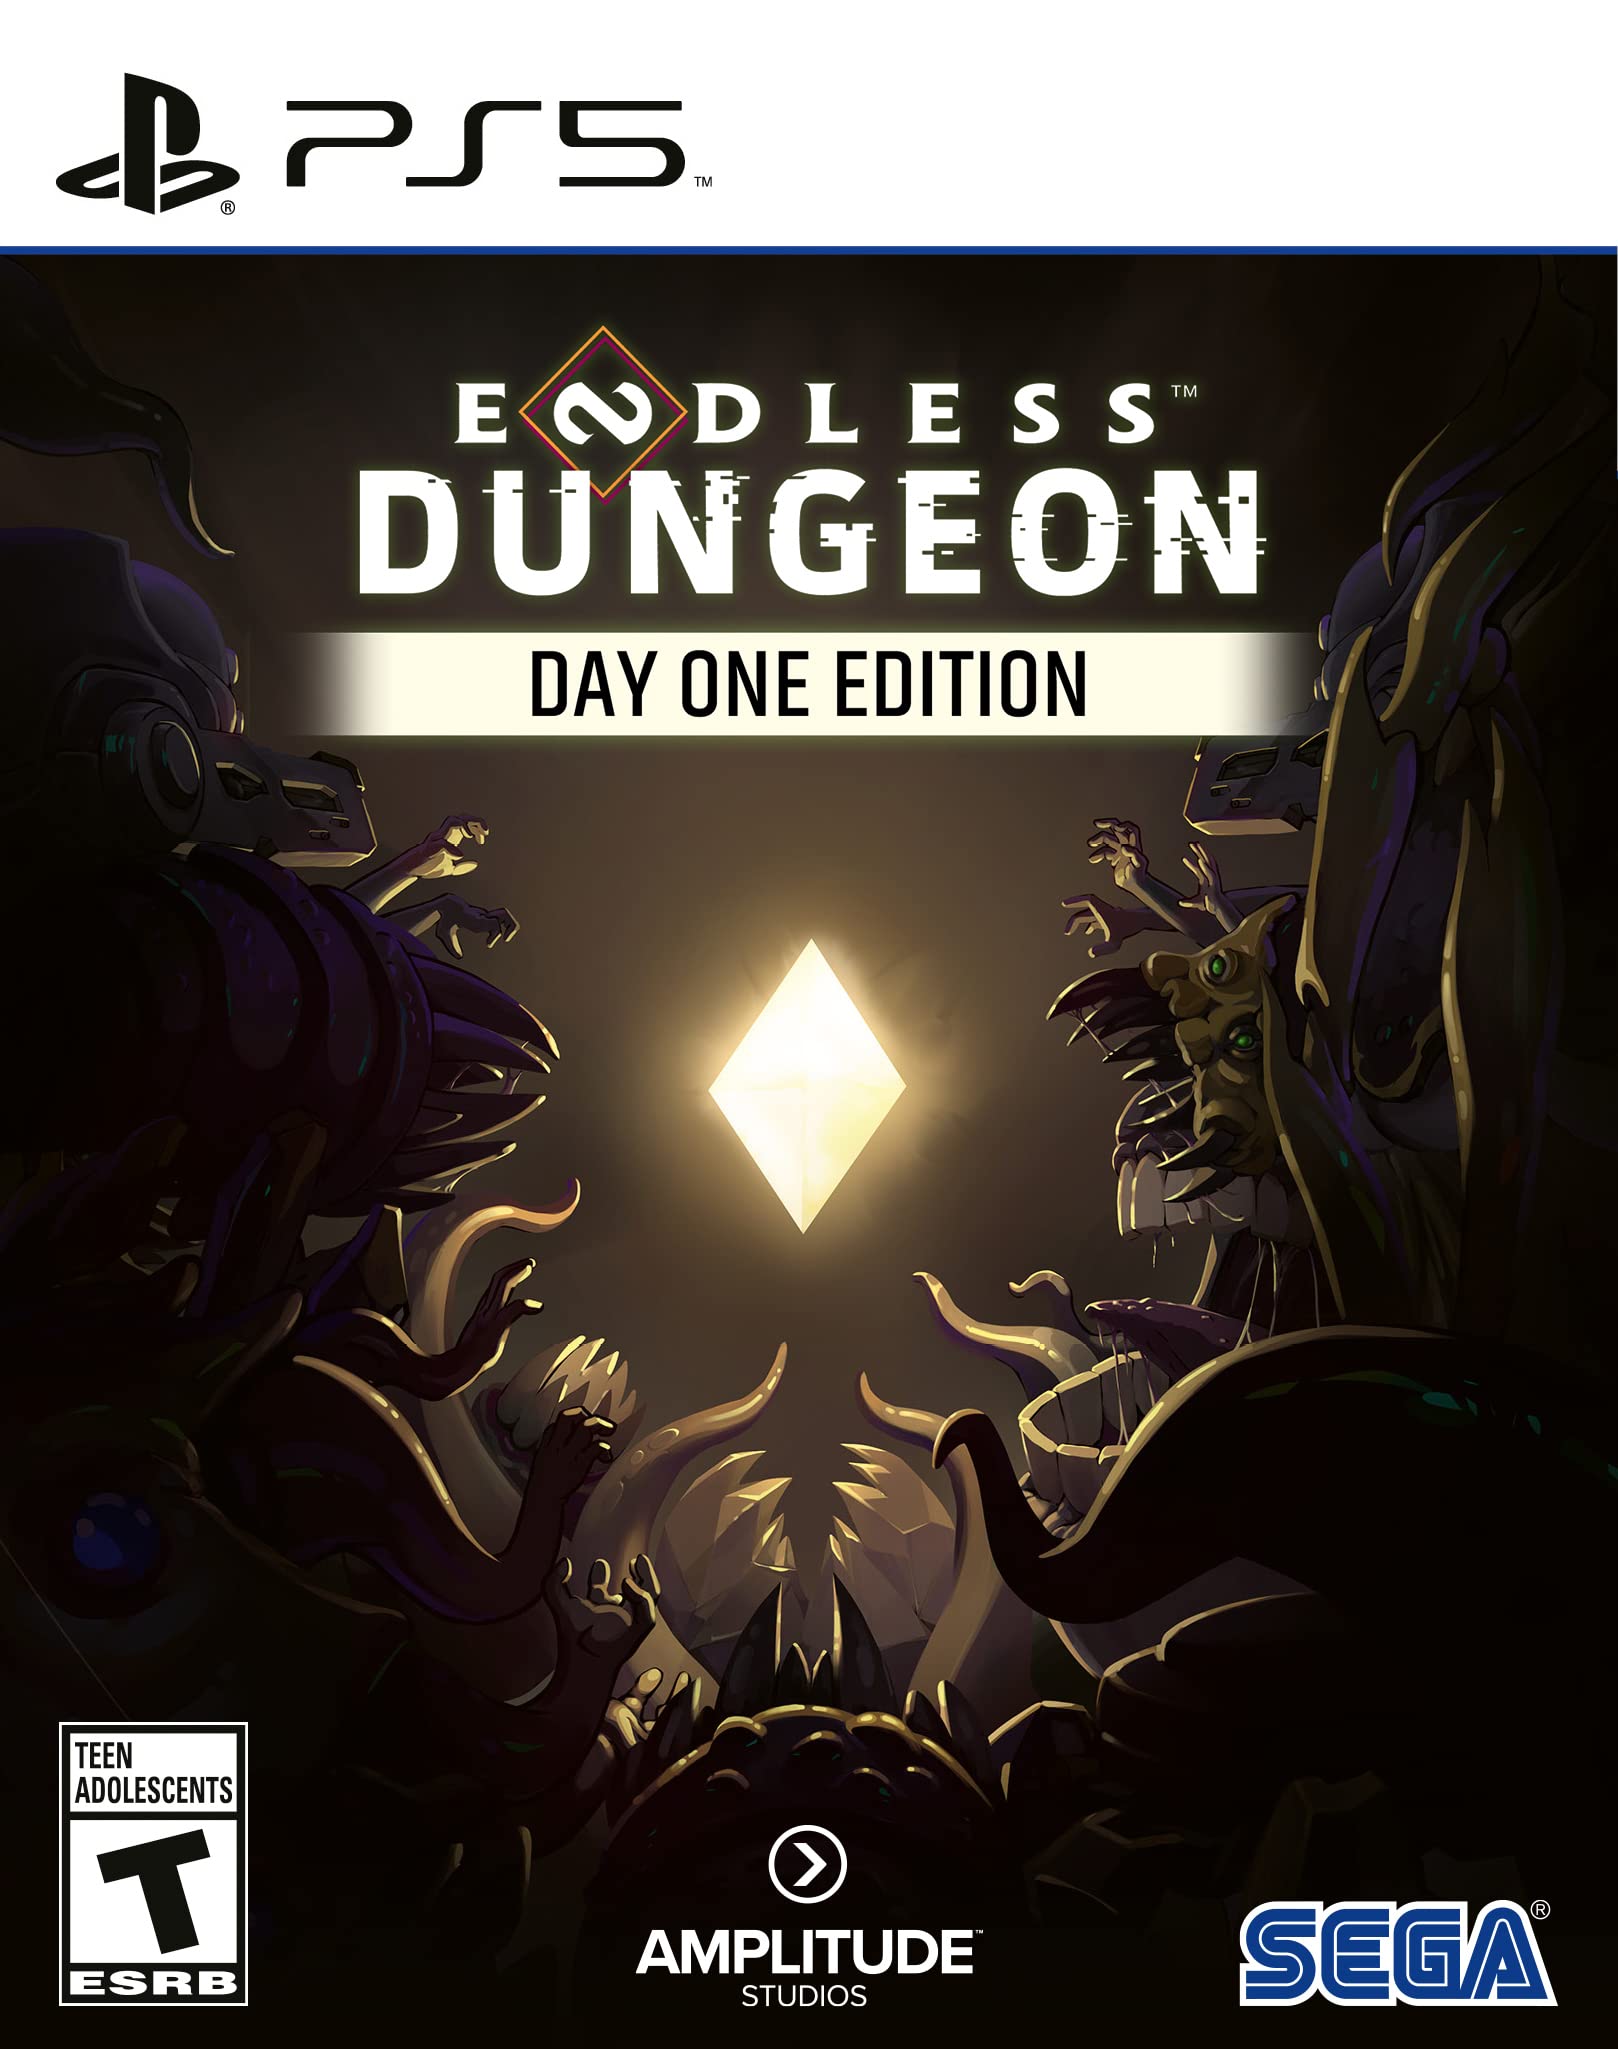 The Endless Dungeon Launch Edition (͢:) - PS5